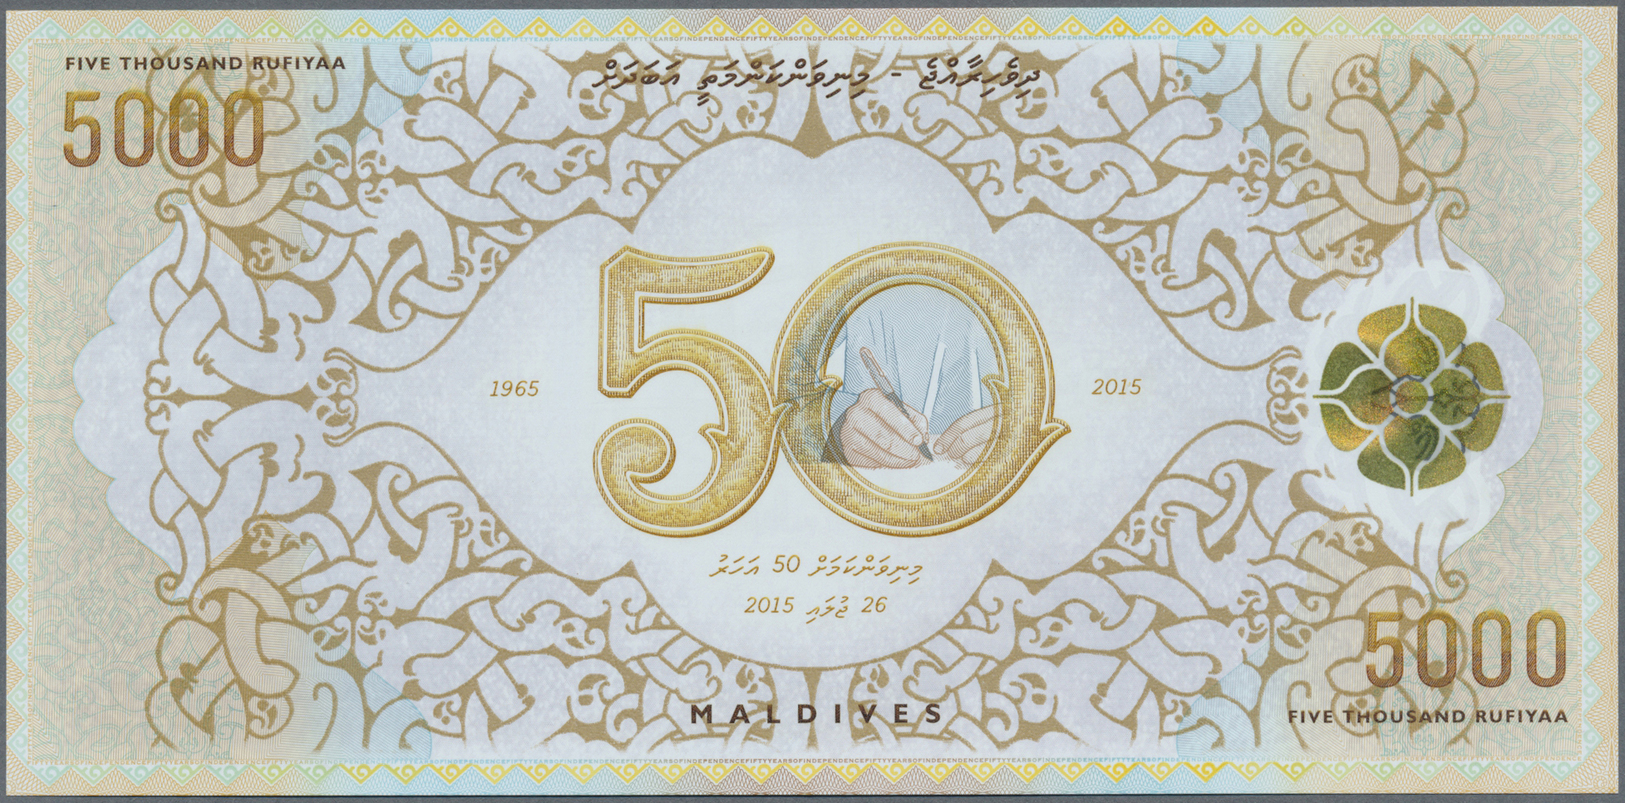 01649 Maldives / Malediven: Polymer Banknote 5000 Rupees 2015, Commemorative Issue P. New, With Very Low Serial Number # - Maldives